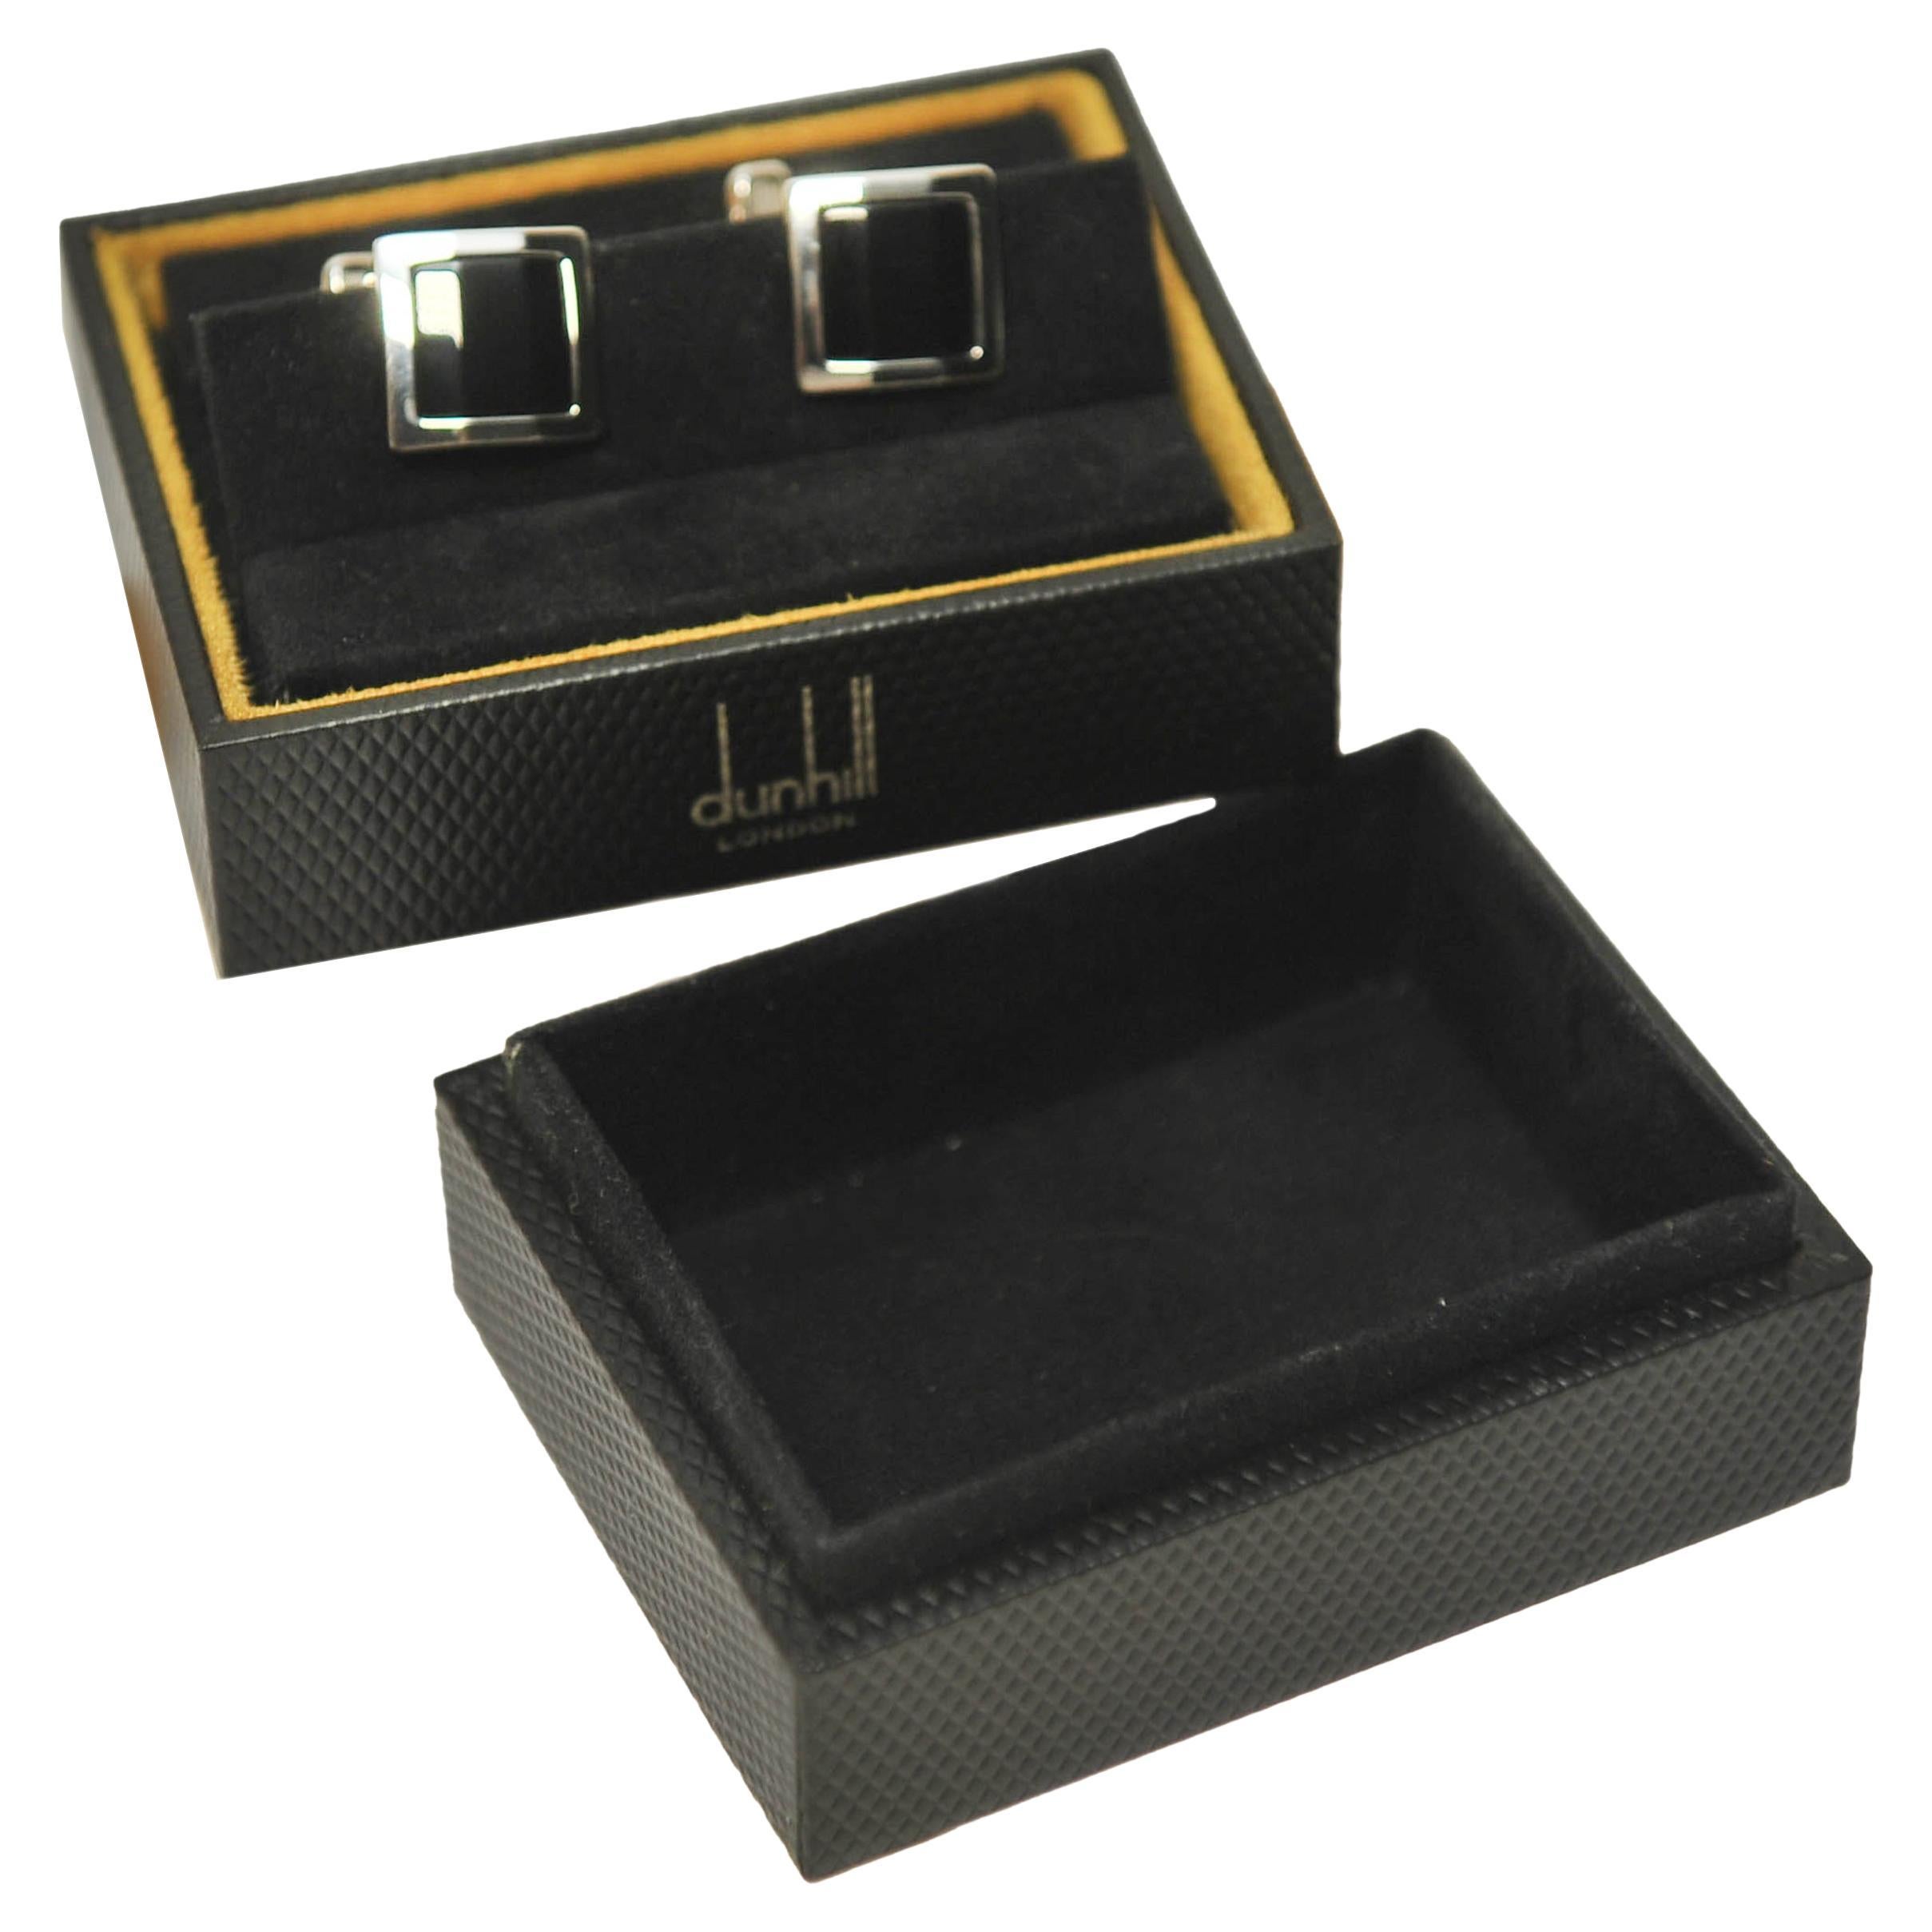 Dunhill of London Sterling Silver & Onyx Cufflinks in Original Dunhill Presentation Box & Card

Engraved logo on the swivel fastening.

99% Silver, 1% Rhodium plated
Made in Germany
